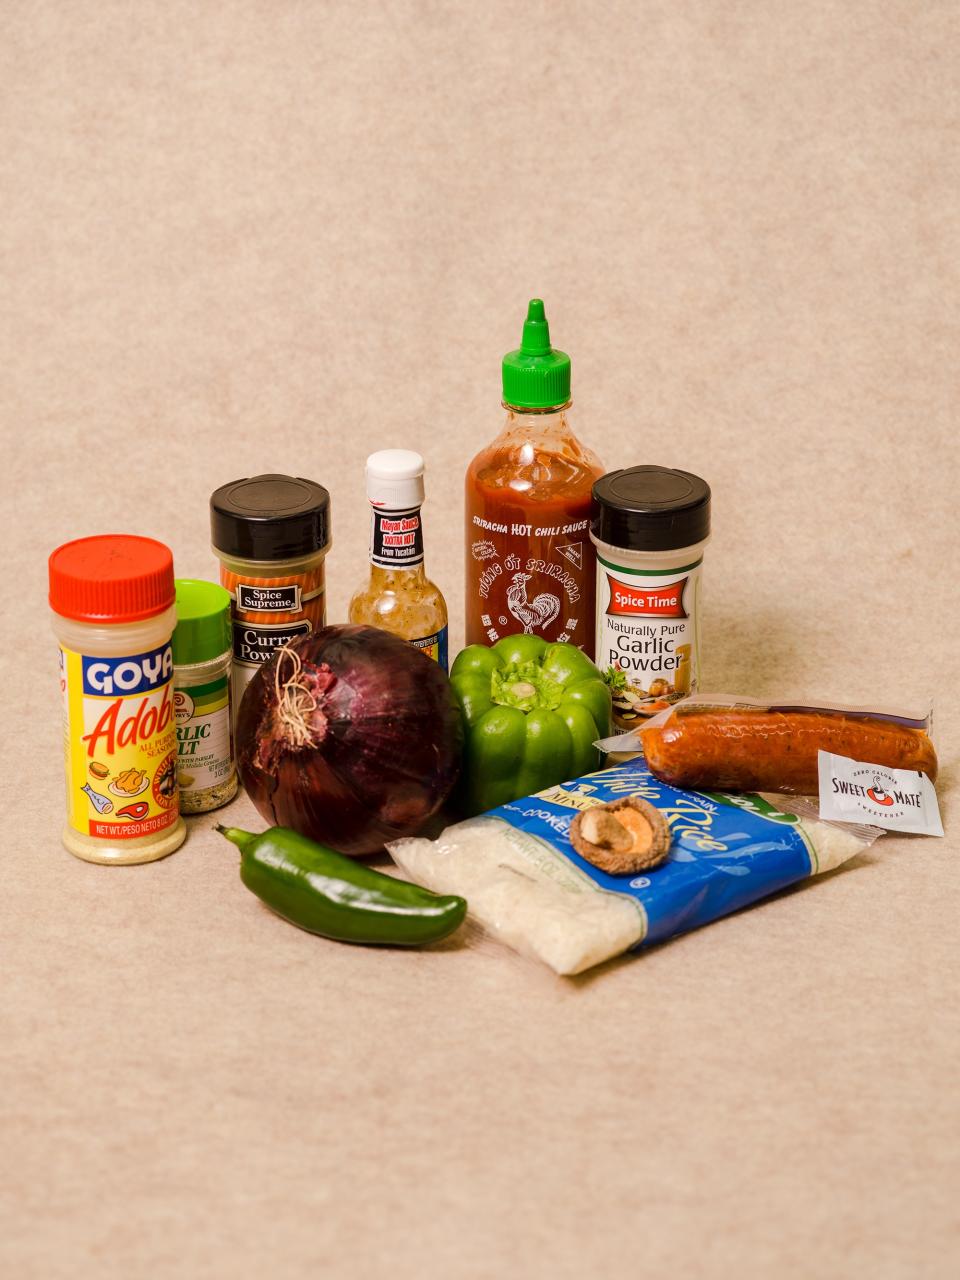 All the ingredients in Johnson’s recipe.